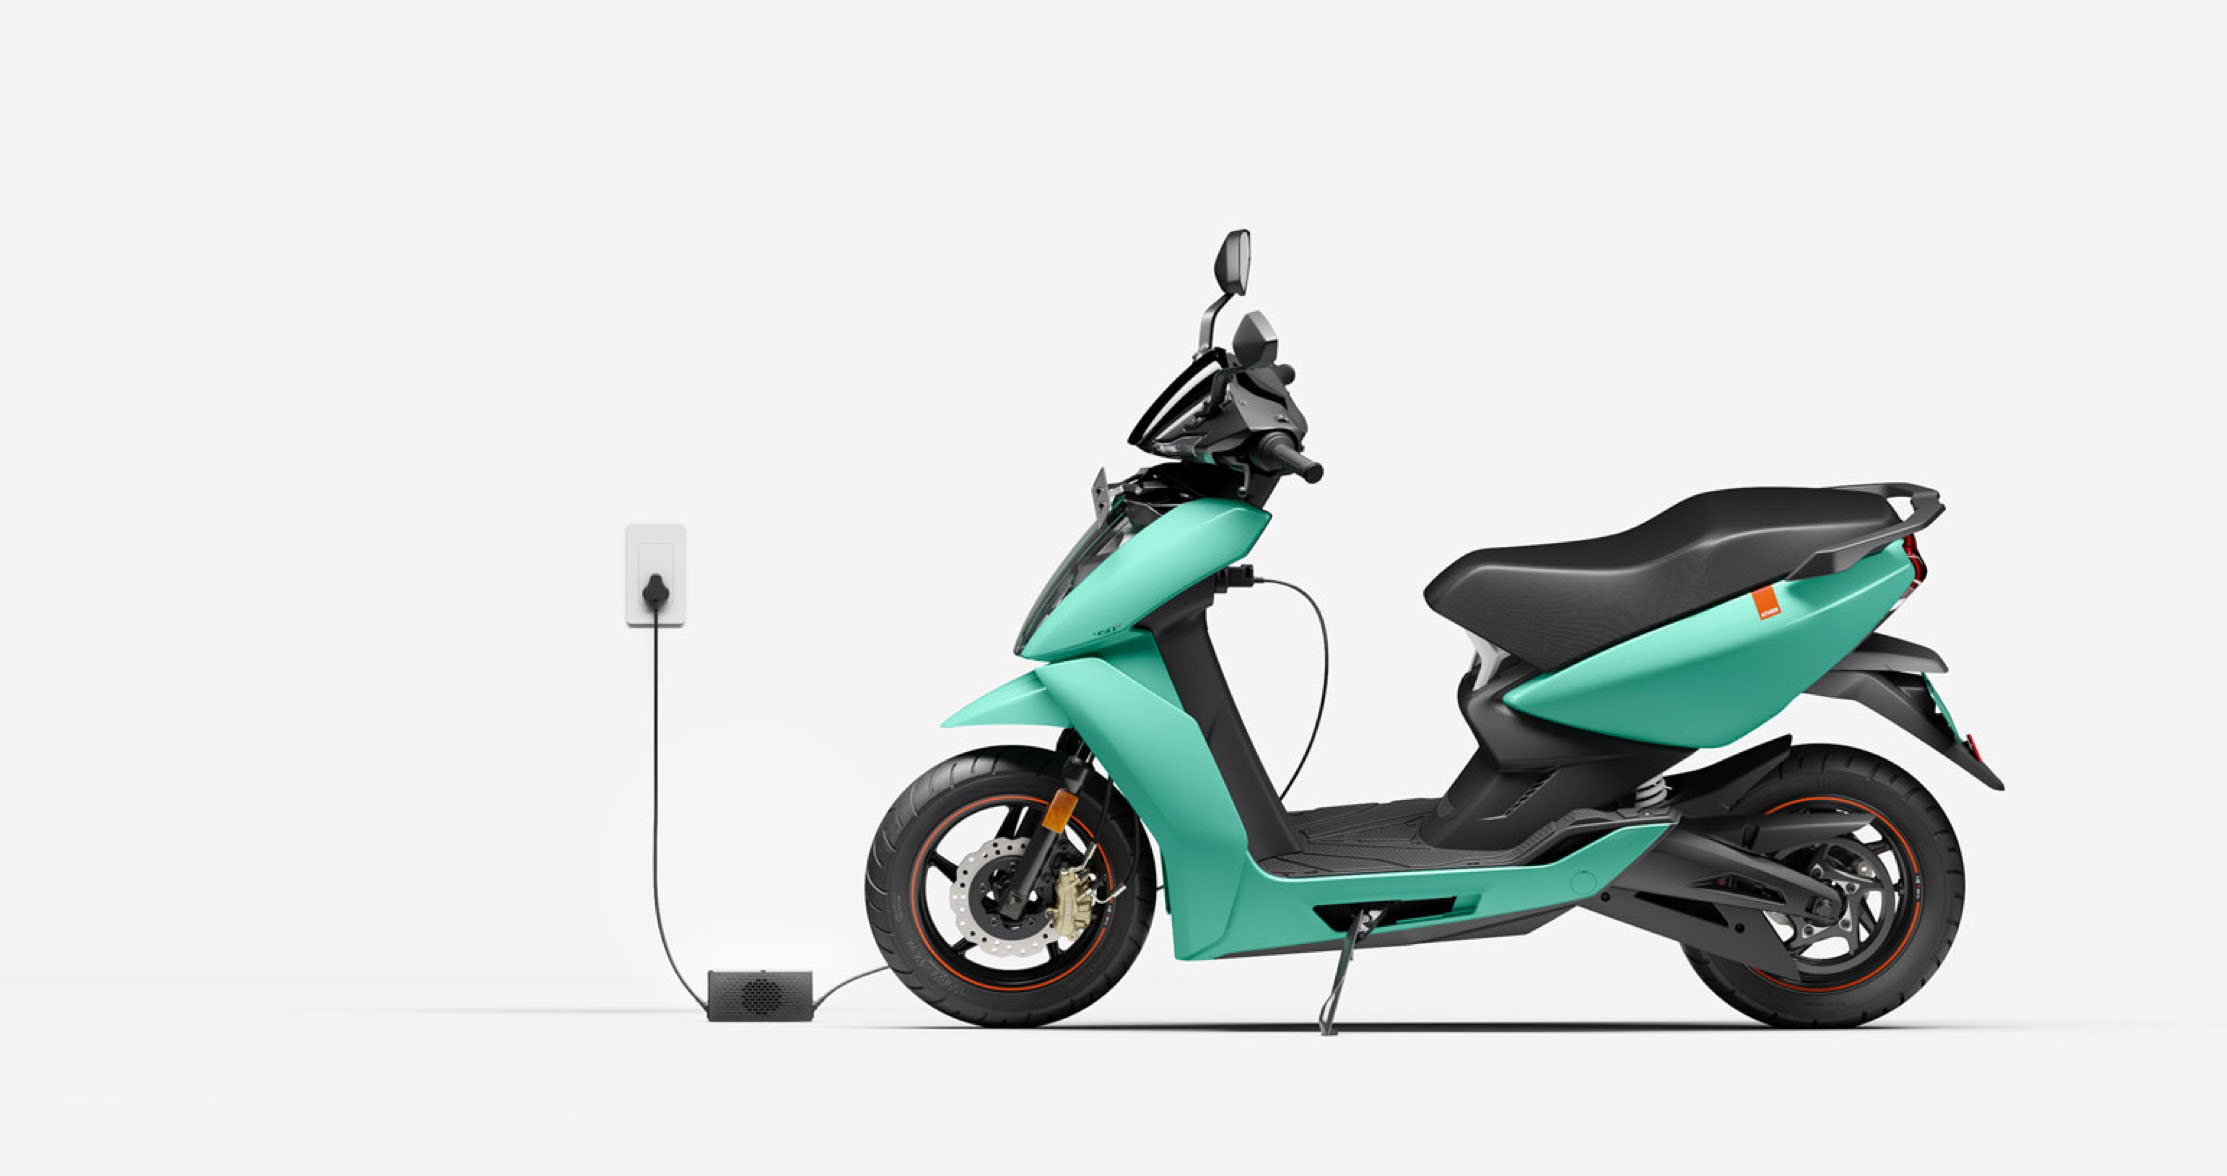 Ather Energy adds 16 new markets, will spread to 27 cities by Q1 2021